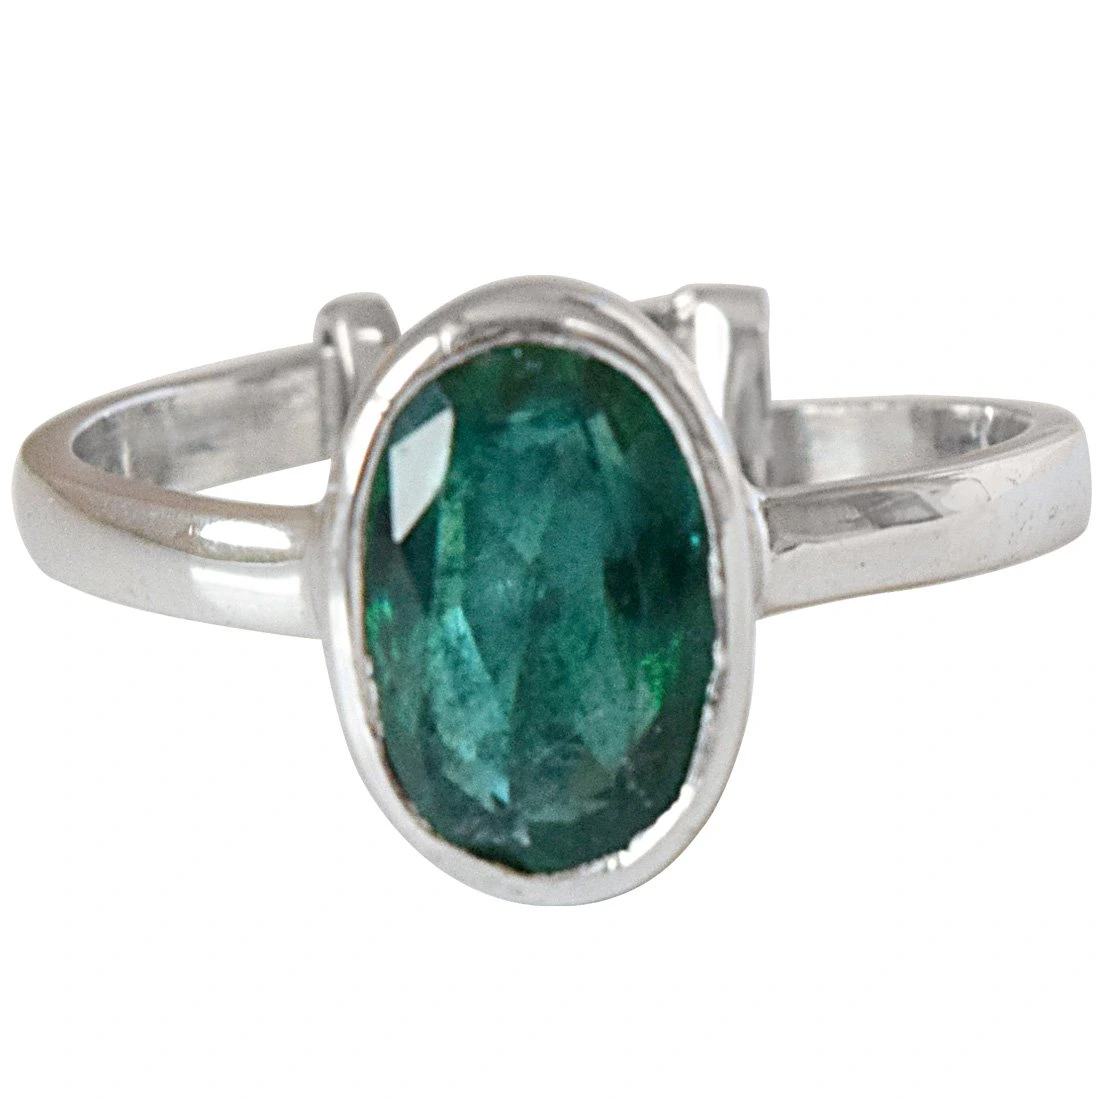 Emerald Enchantment: Majestic Green Oasis Adjustable Silver Ring (GSR68)